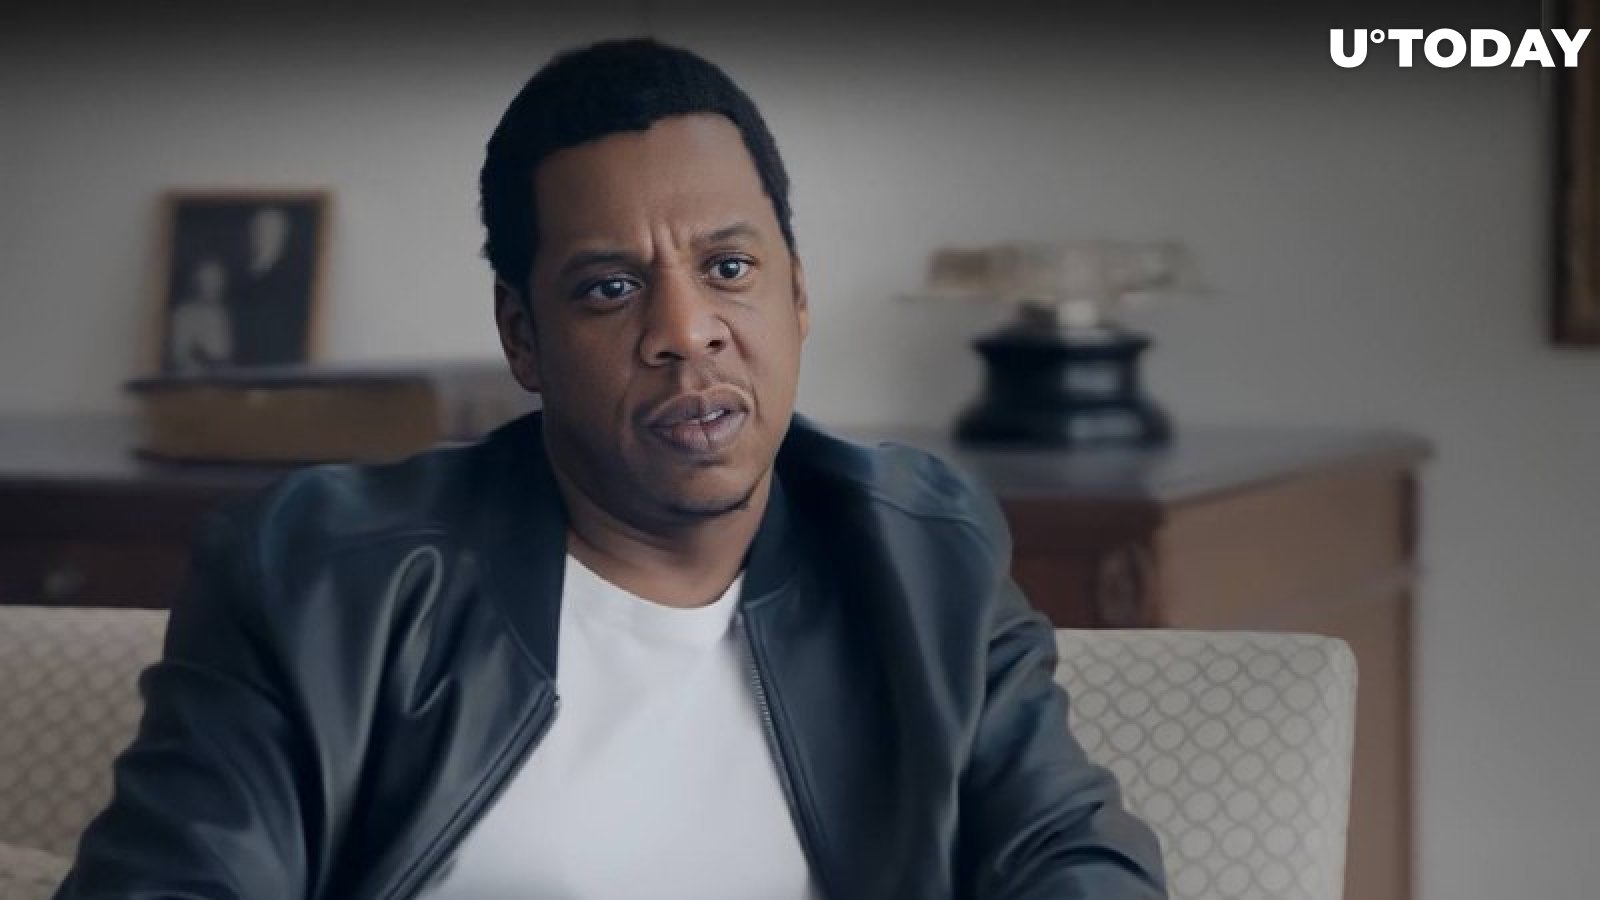 Legendary Jay-Z Sneakers Worth More Than 1 BTC Go on Auction as NFT